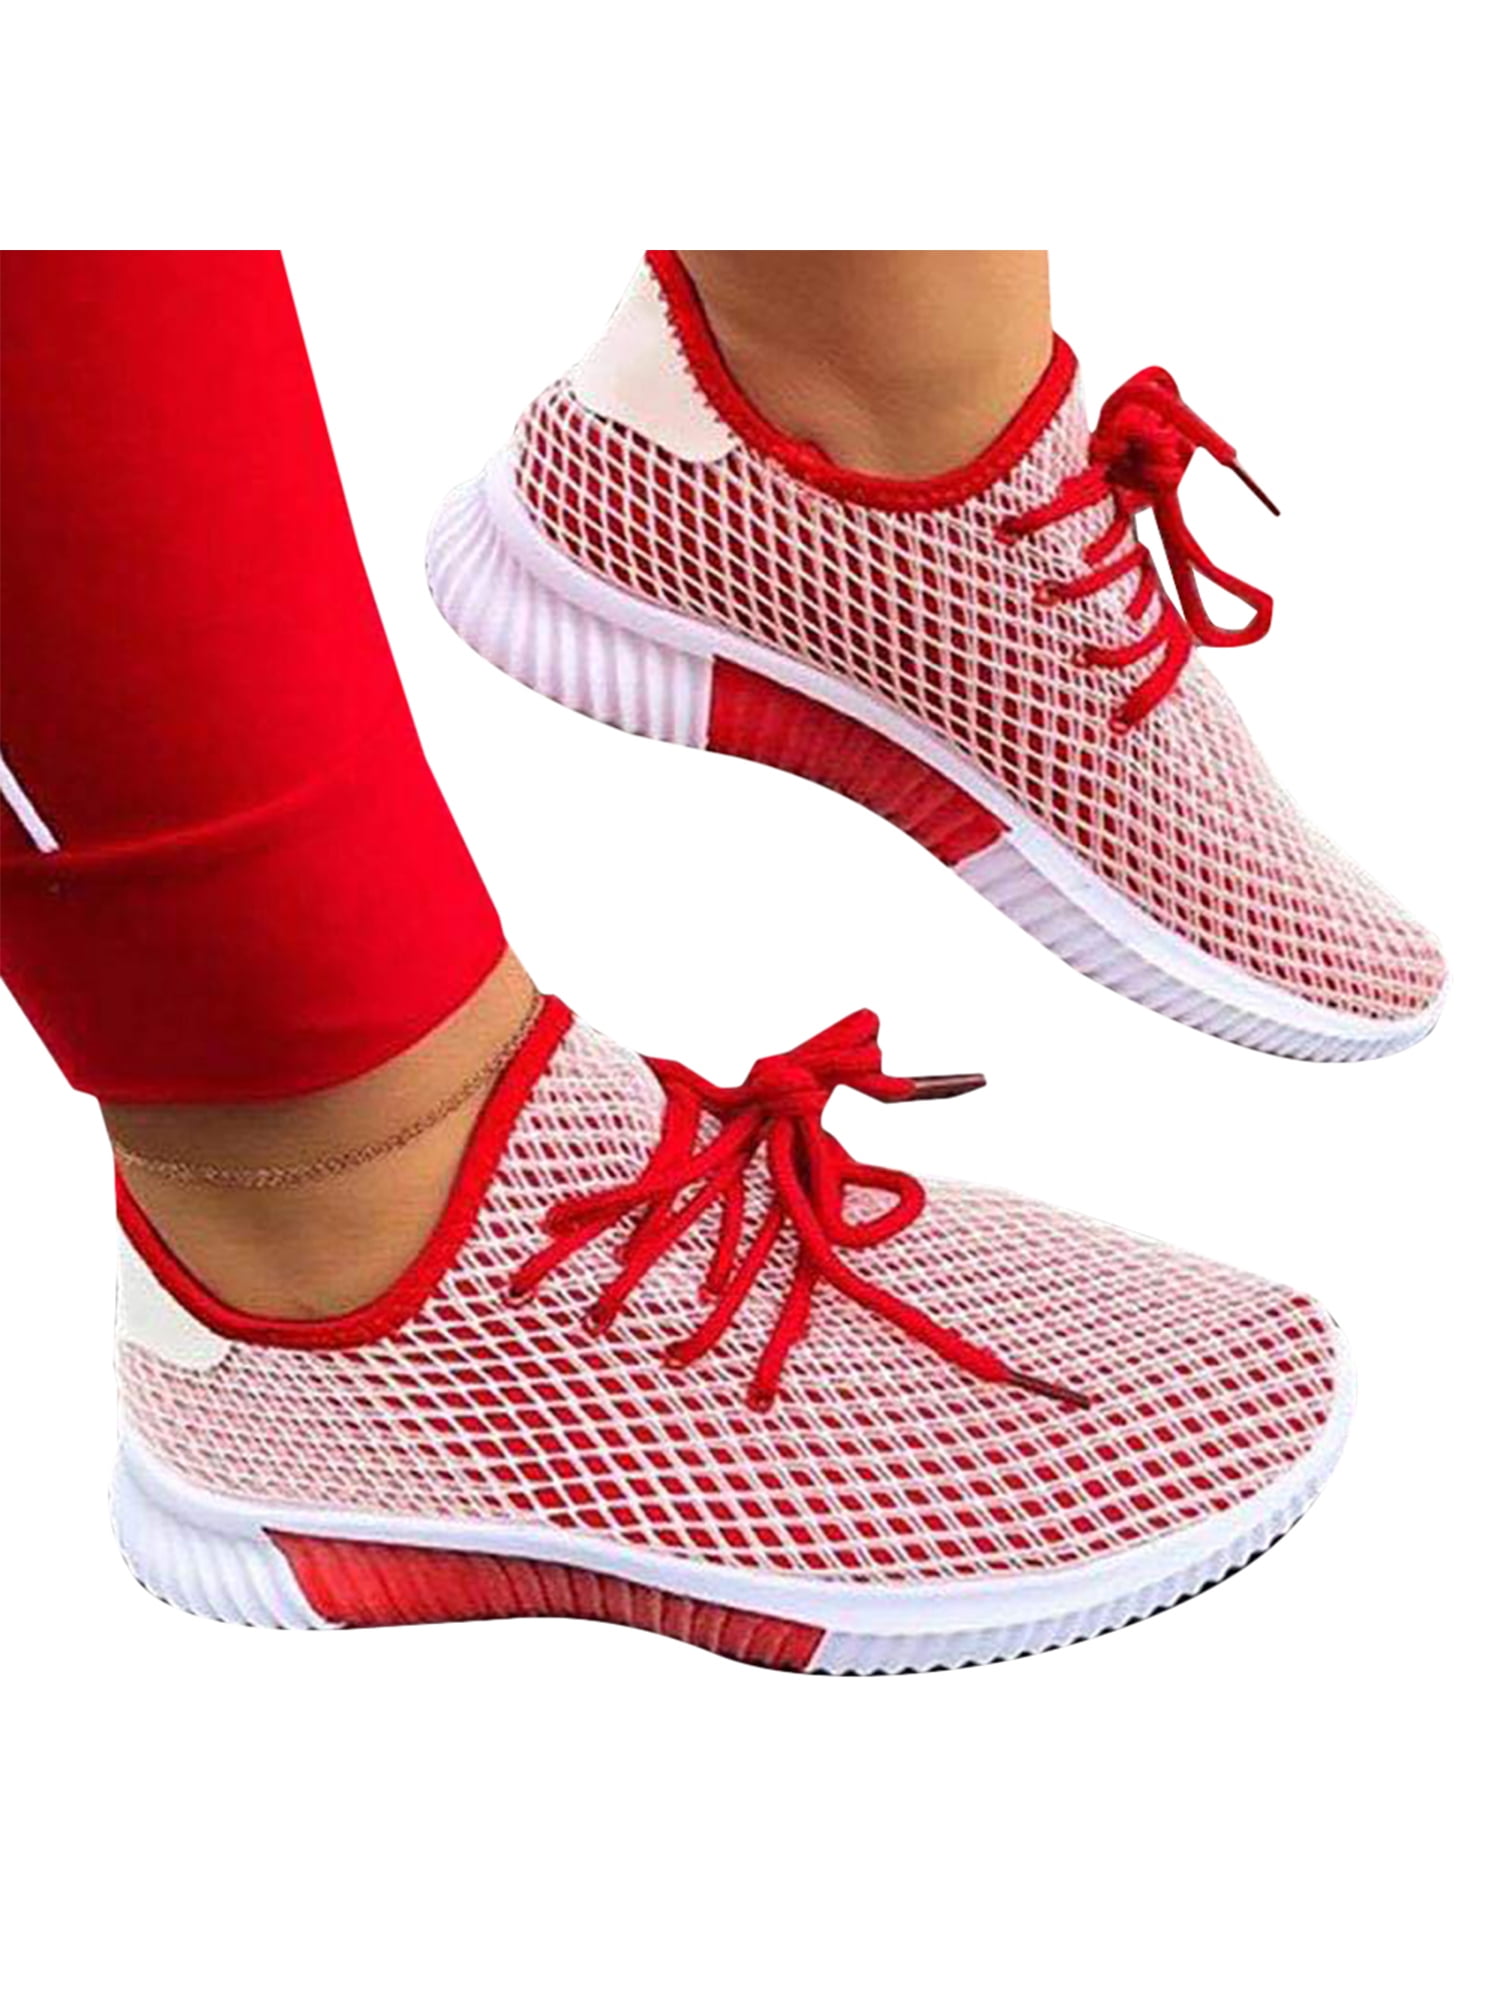 Cute cat kittens Womens lightweight Athelitic Running shoes lace-up breathable fitness sneakers